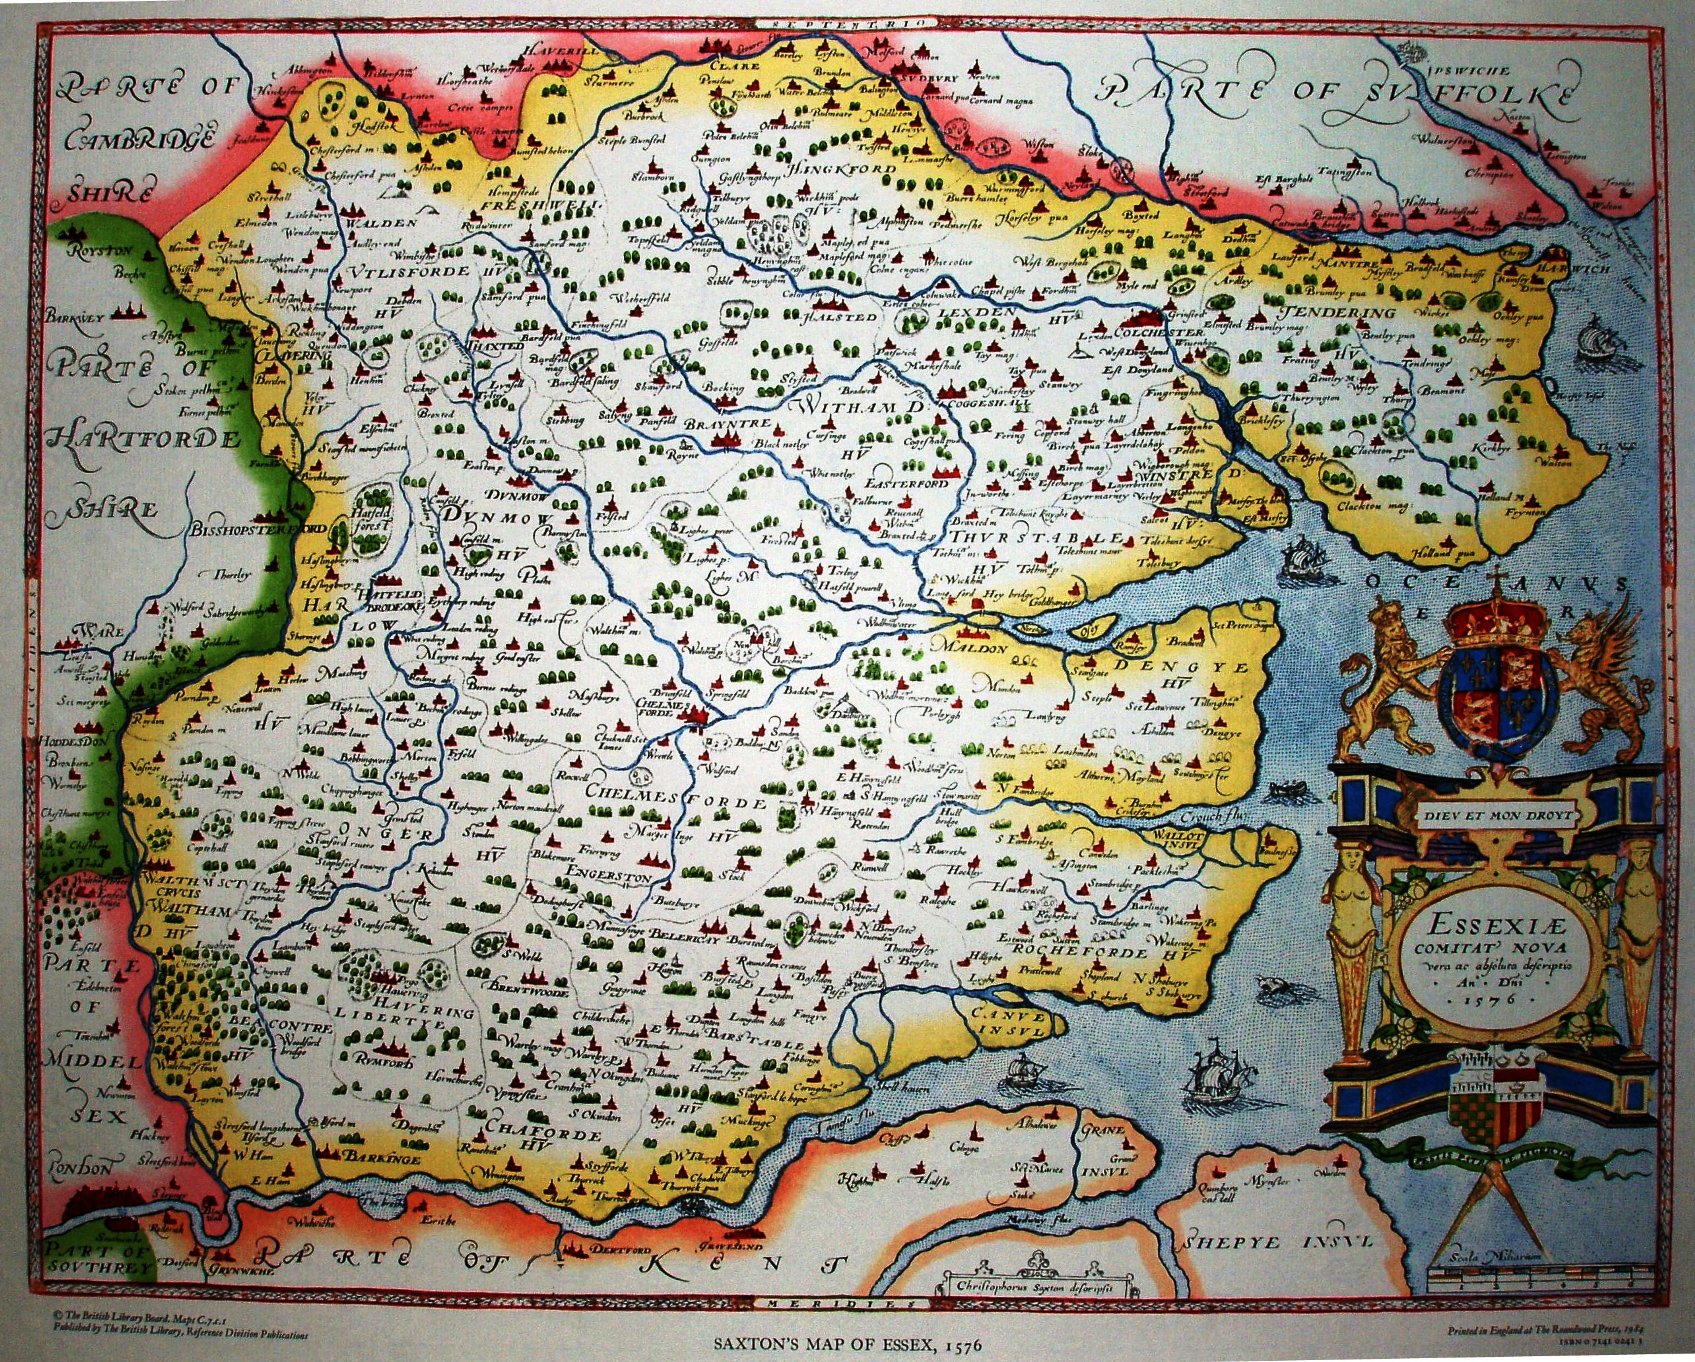 Saxton's 1576 map of Essex - the first county map of Essex.